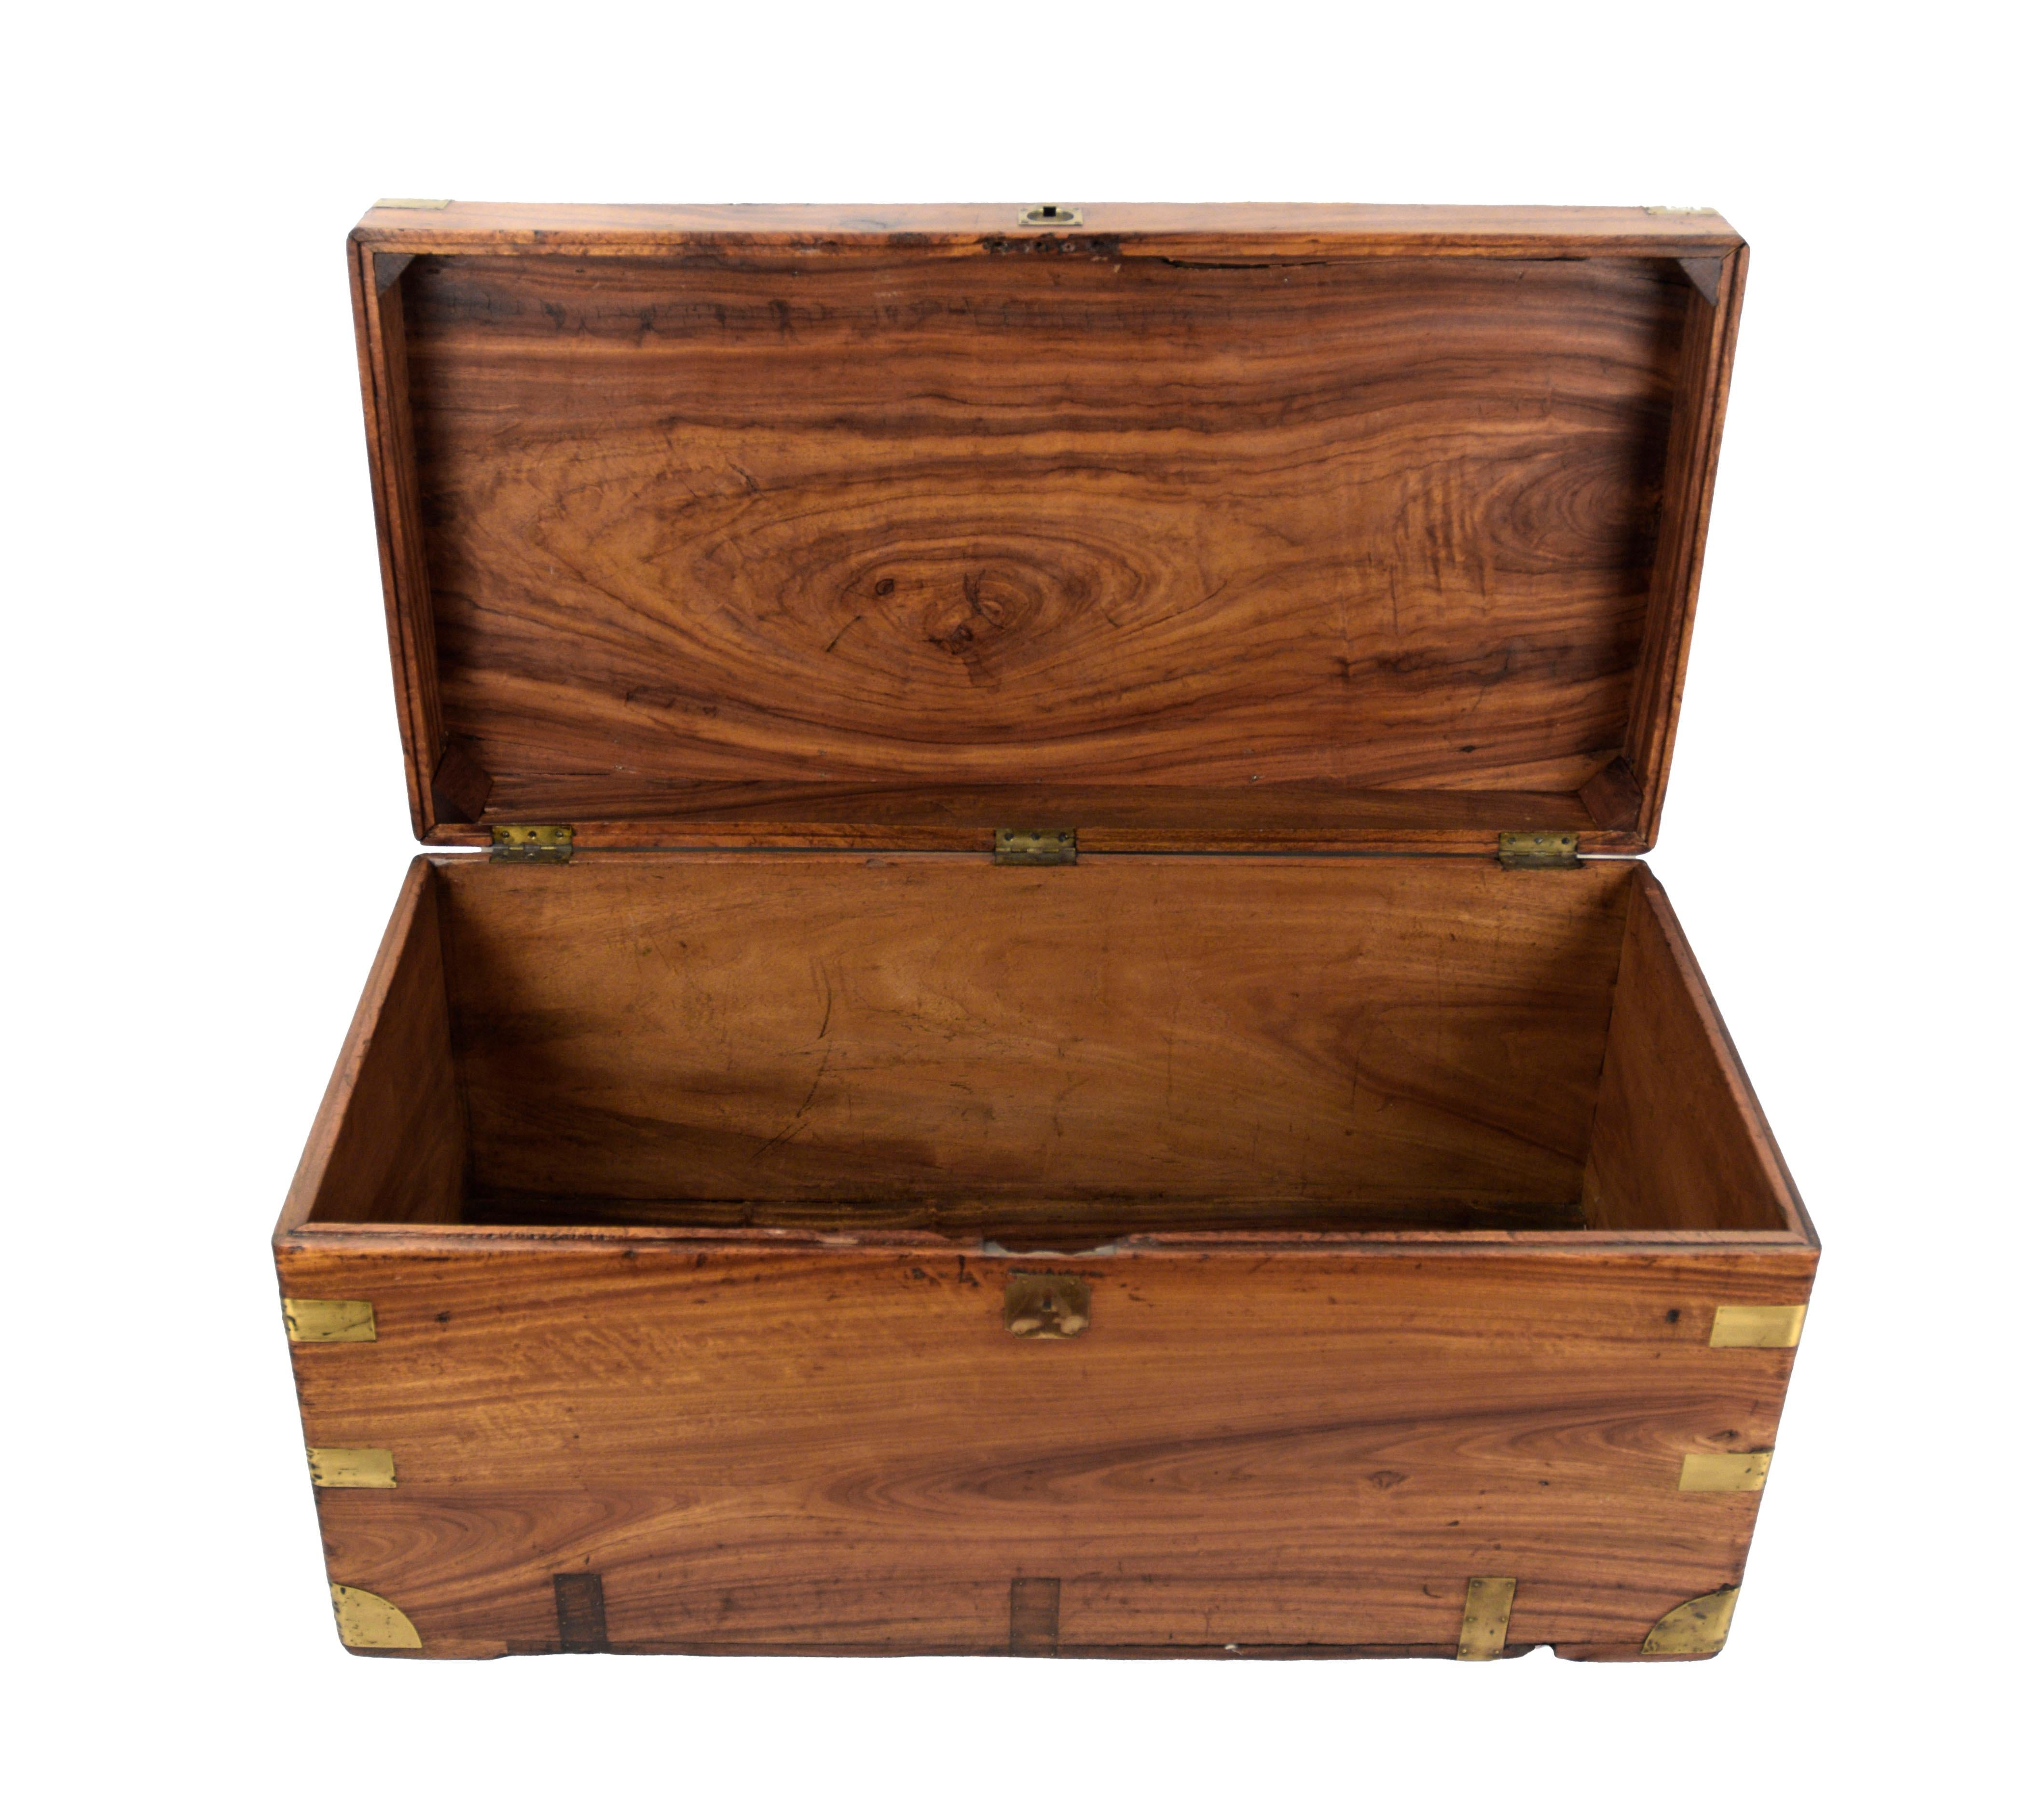 Camphorwood Campaign Chest - Late 19th Century Chinese Export R.B. Van Cleve, NY For Sale 2